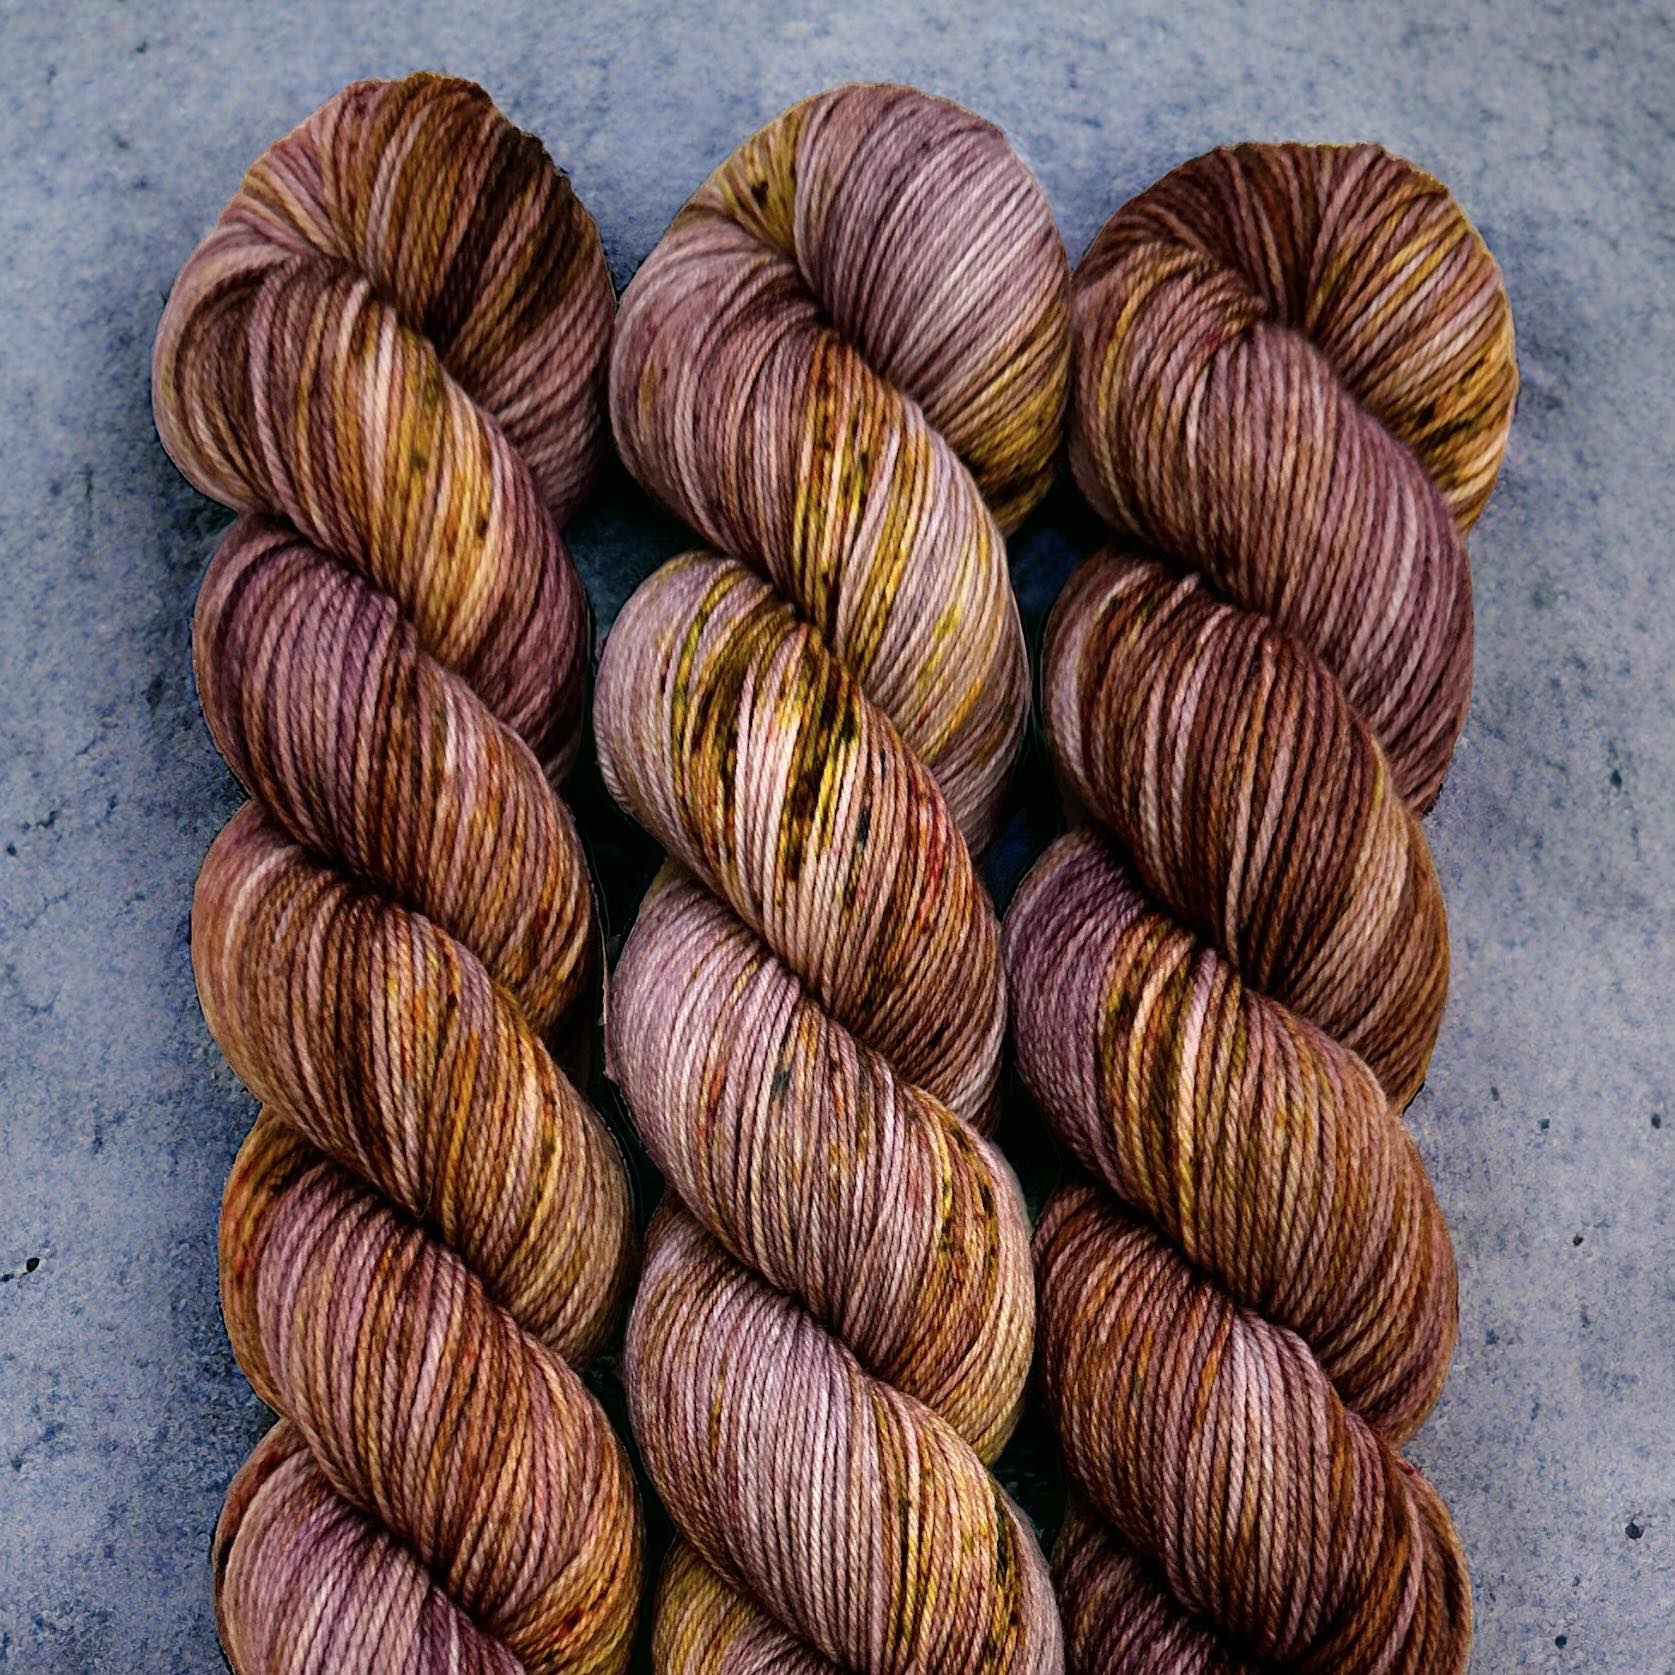 When Pooling Goes Right - SpaceCadet Hand-dyed Yarns